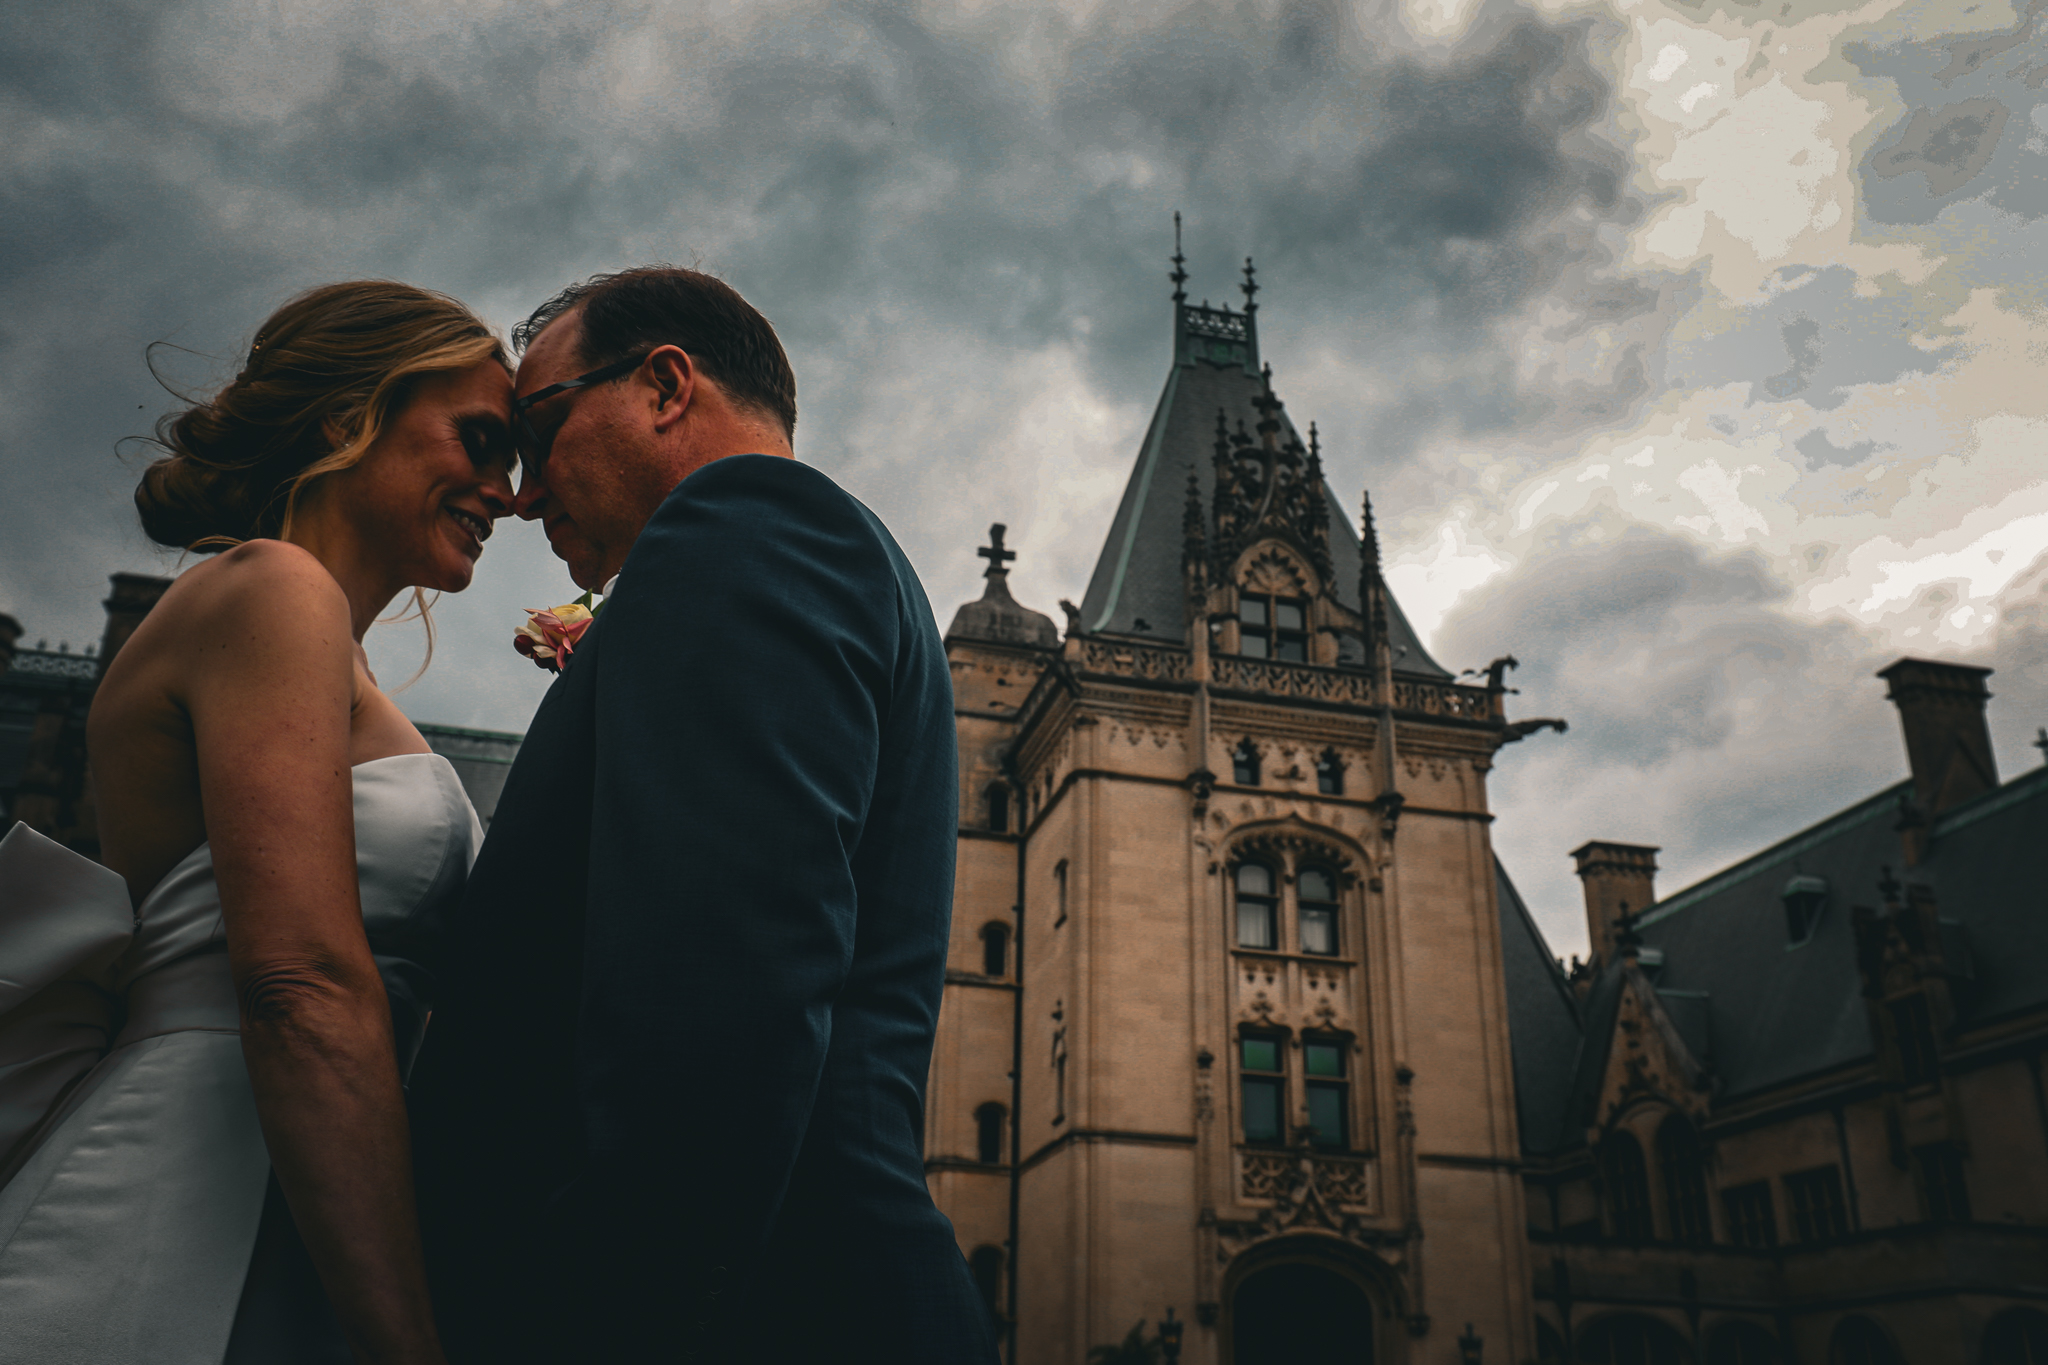 The Biltmore is a great venue for a dream wedding in the United States.